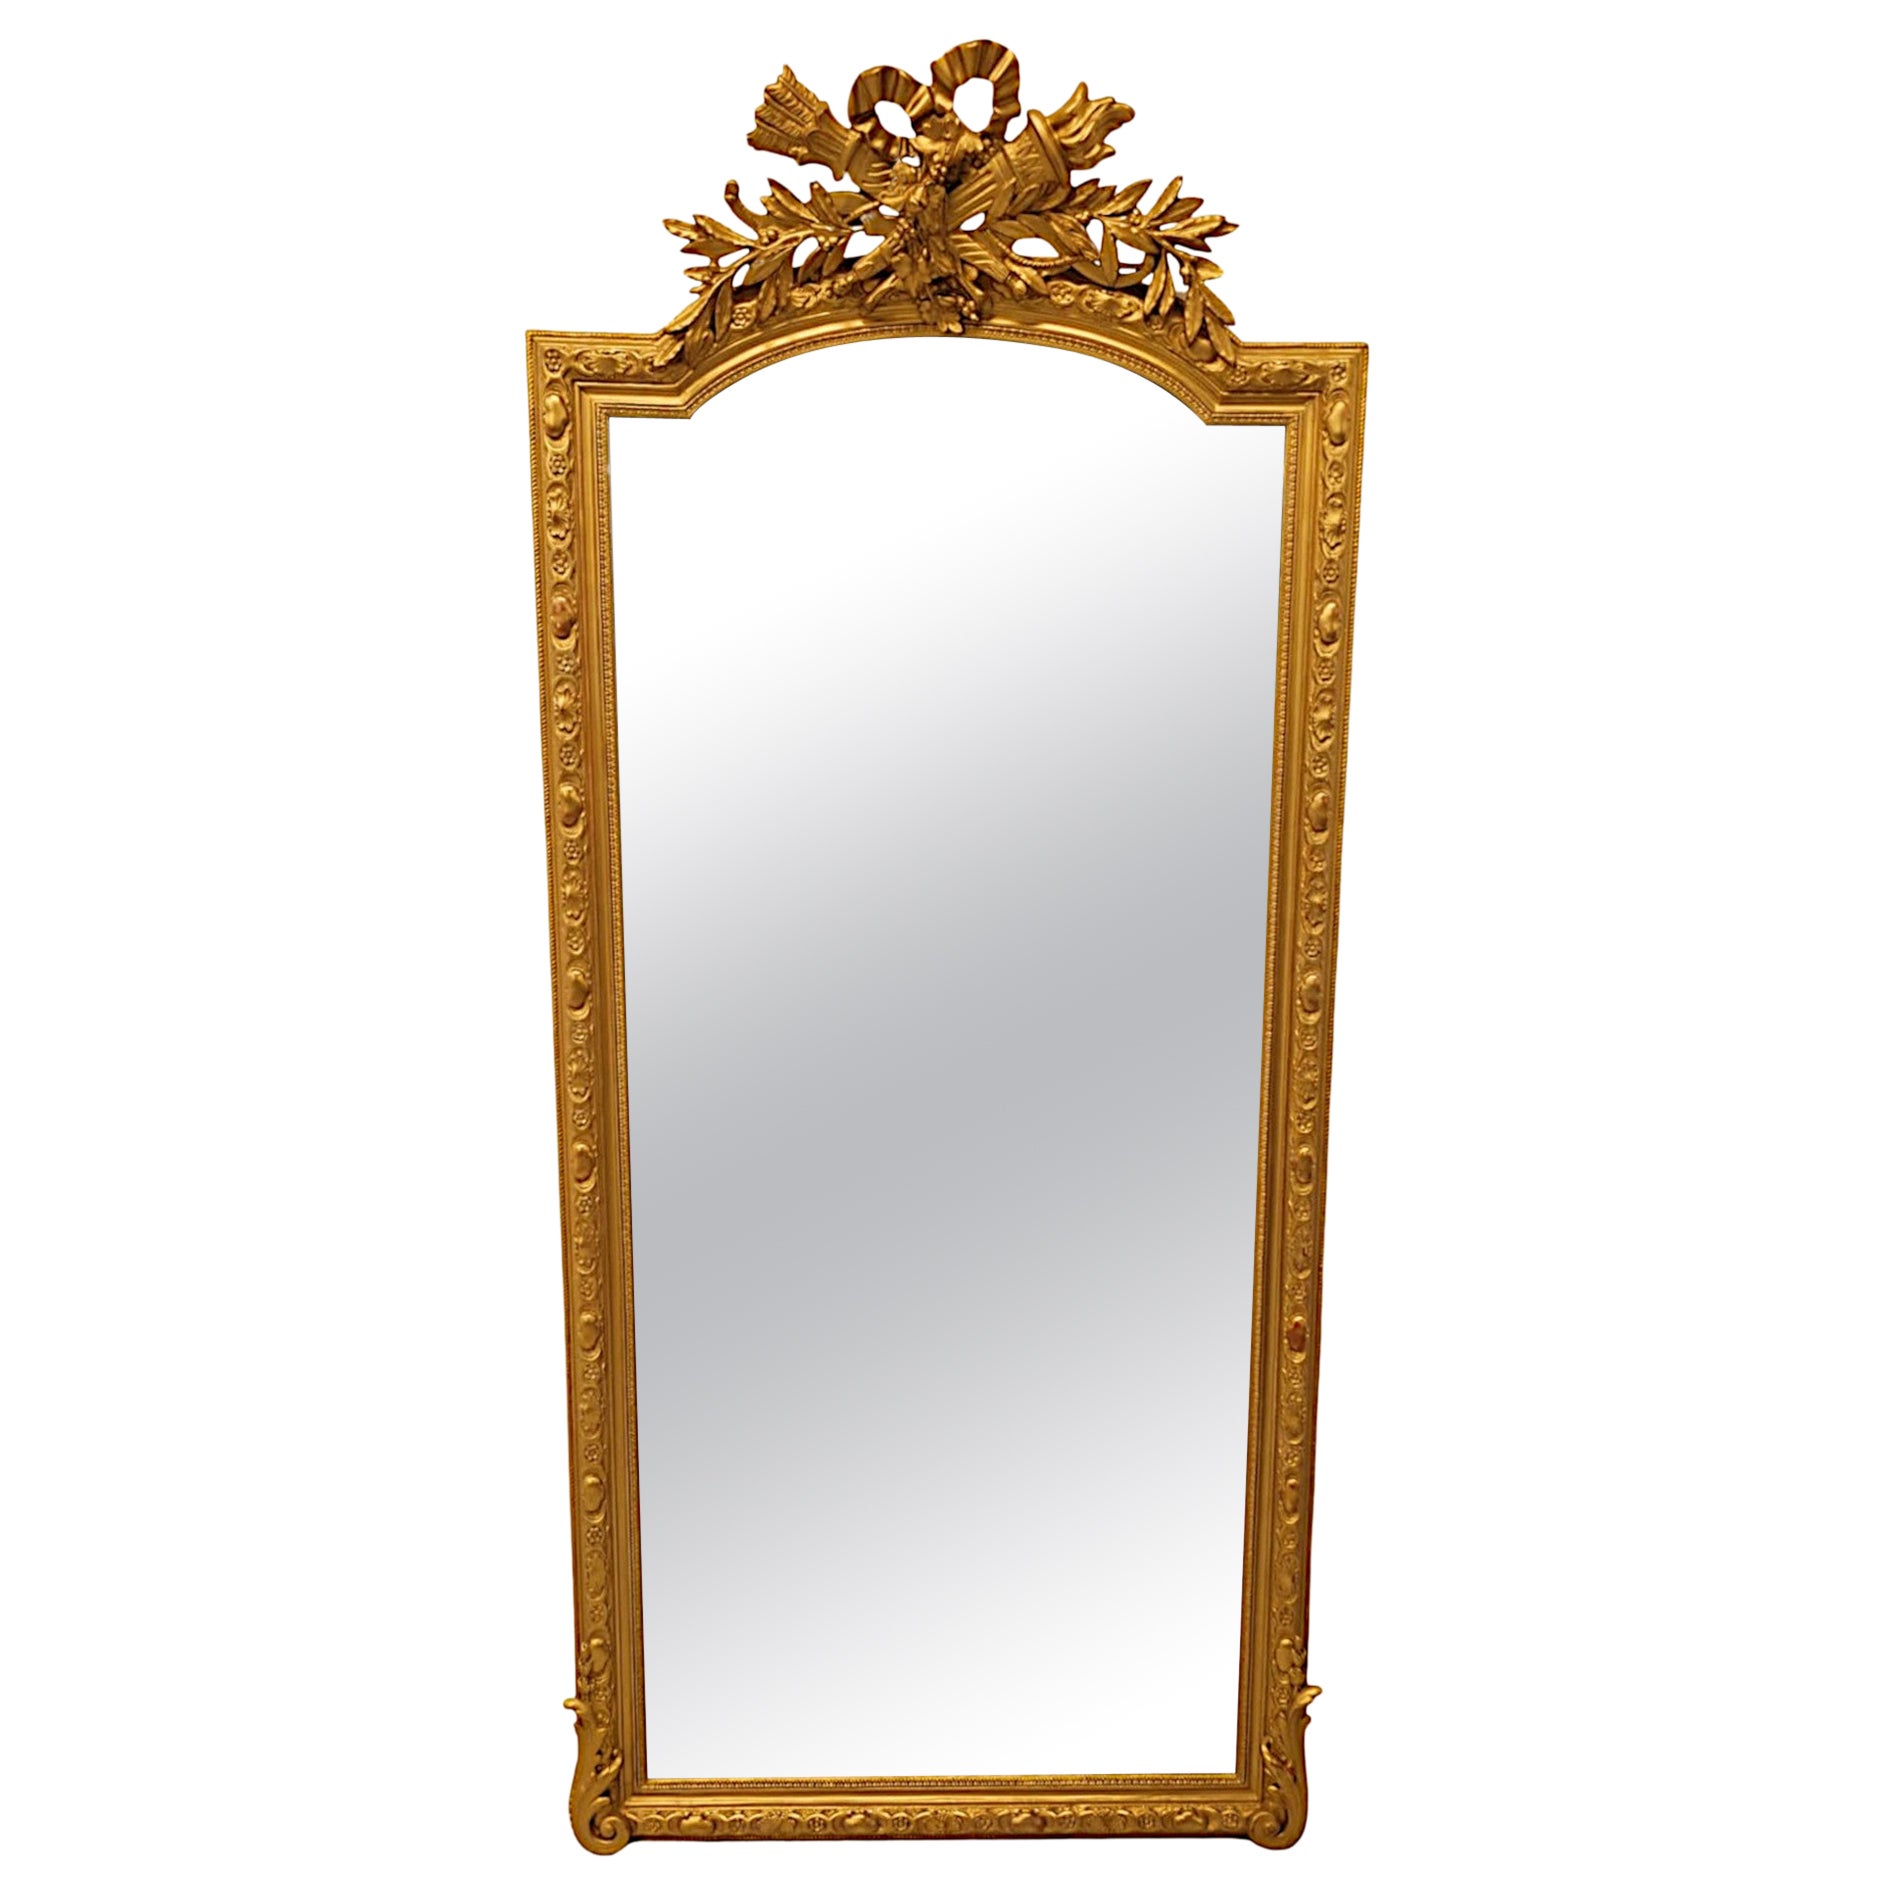 A Very Fine Tall 19th Century Giltwood Pier or Dressing Mirror